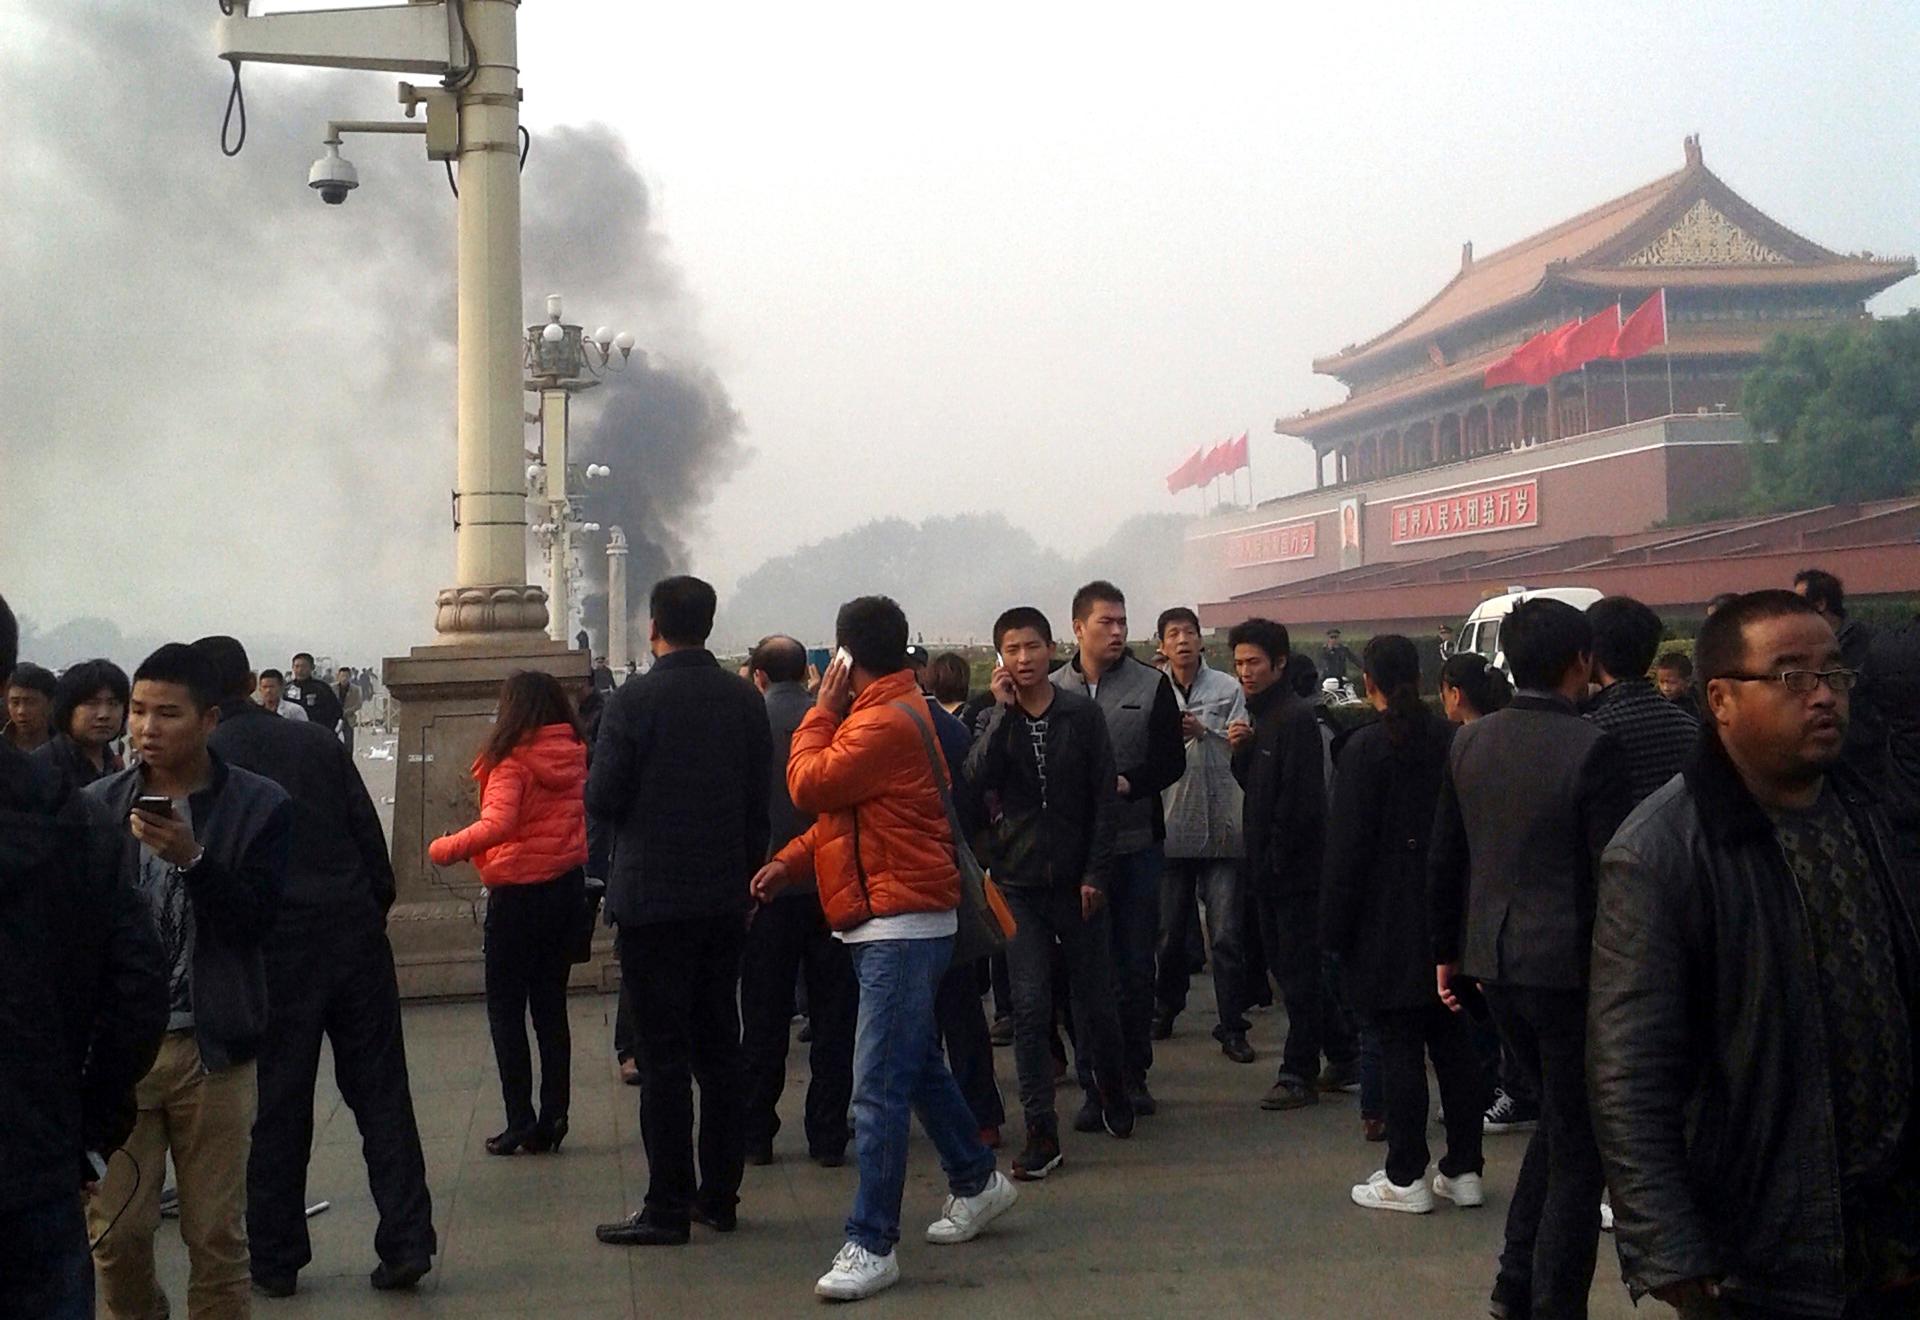 People walk along the sidewalk of Chang'an Avenue as smoke raises in front of the main entrance of the Forbidden City at Tiananmen Square in Beijing, on October 28, 2013.